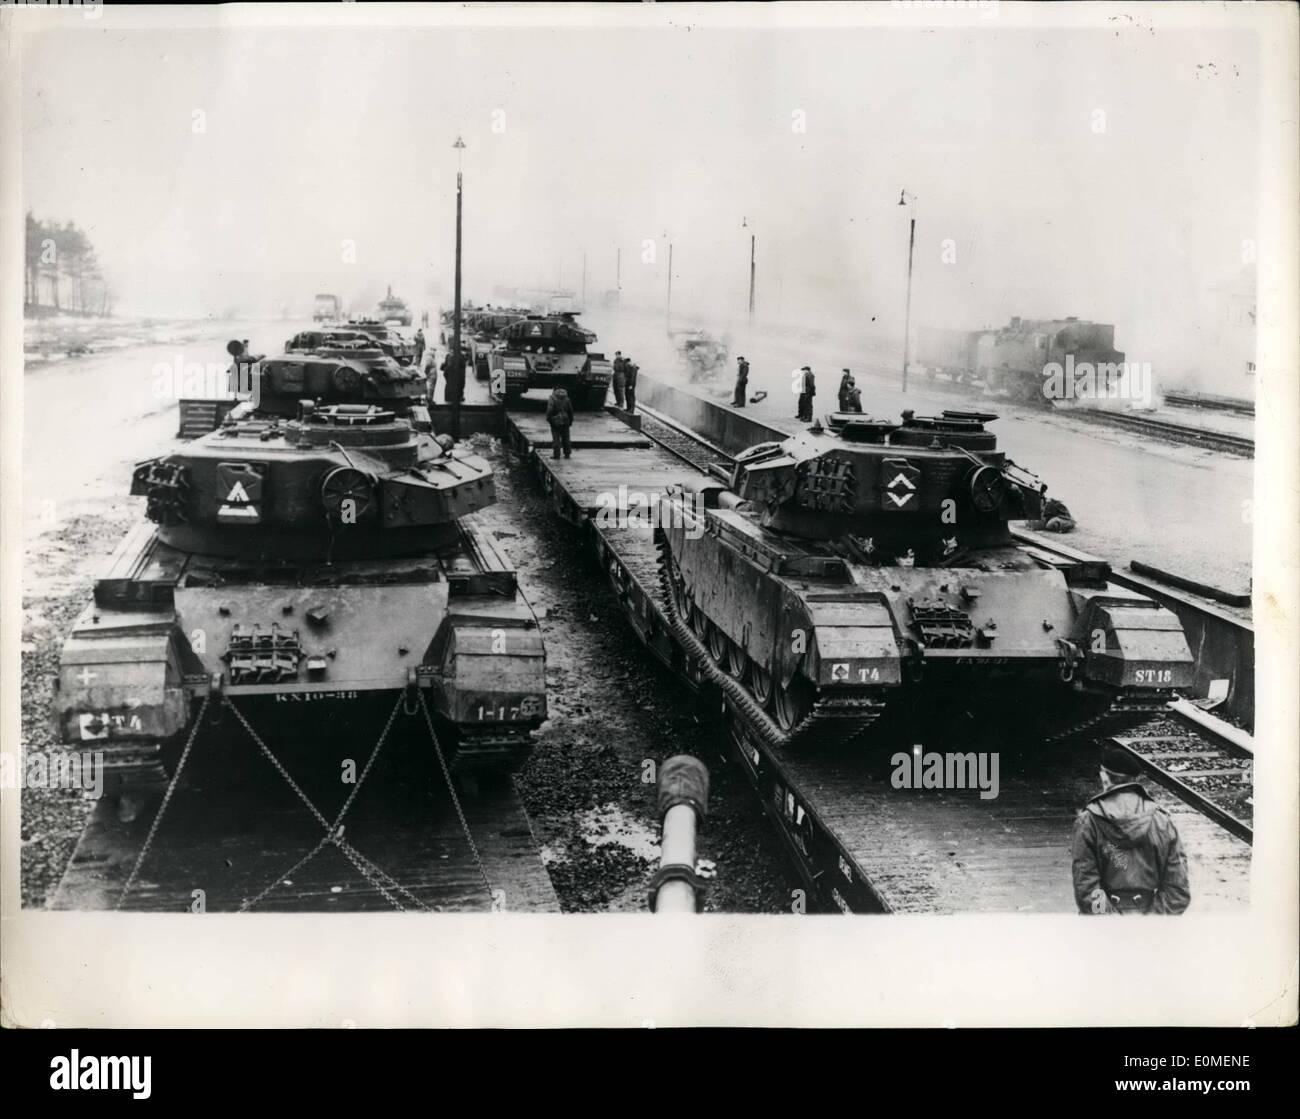 Feb. 02, 1955 - Tank Battalion Under Training at Belsen-Horne Germany..: The 1st. Squadron of the 4th. Heavy Tank Battalion 1st. Netherland Corps came from Holland by train for training at the B.A.O.R, Tank Gunnery Range at Belsen-Hohne, Germany recently.. They were replaced by another squadron of their battalion. This B.A.O.R Range is the largest in Europe and is used by armoured units from many N.A.T.O Nations. Photo shows The 50 Ton Centurion Tanks being driven on to the Railway wagons which will return them to Holland. Stock Photo